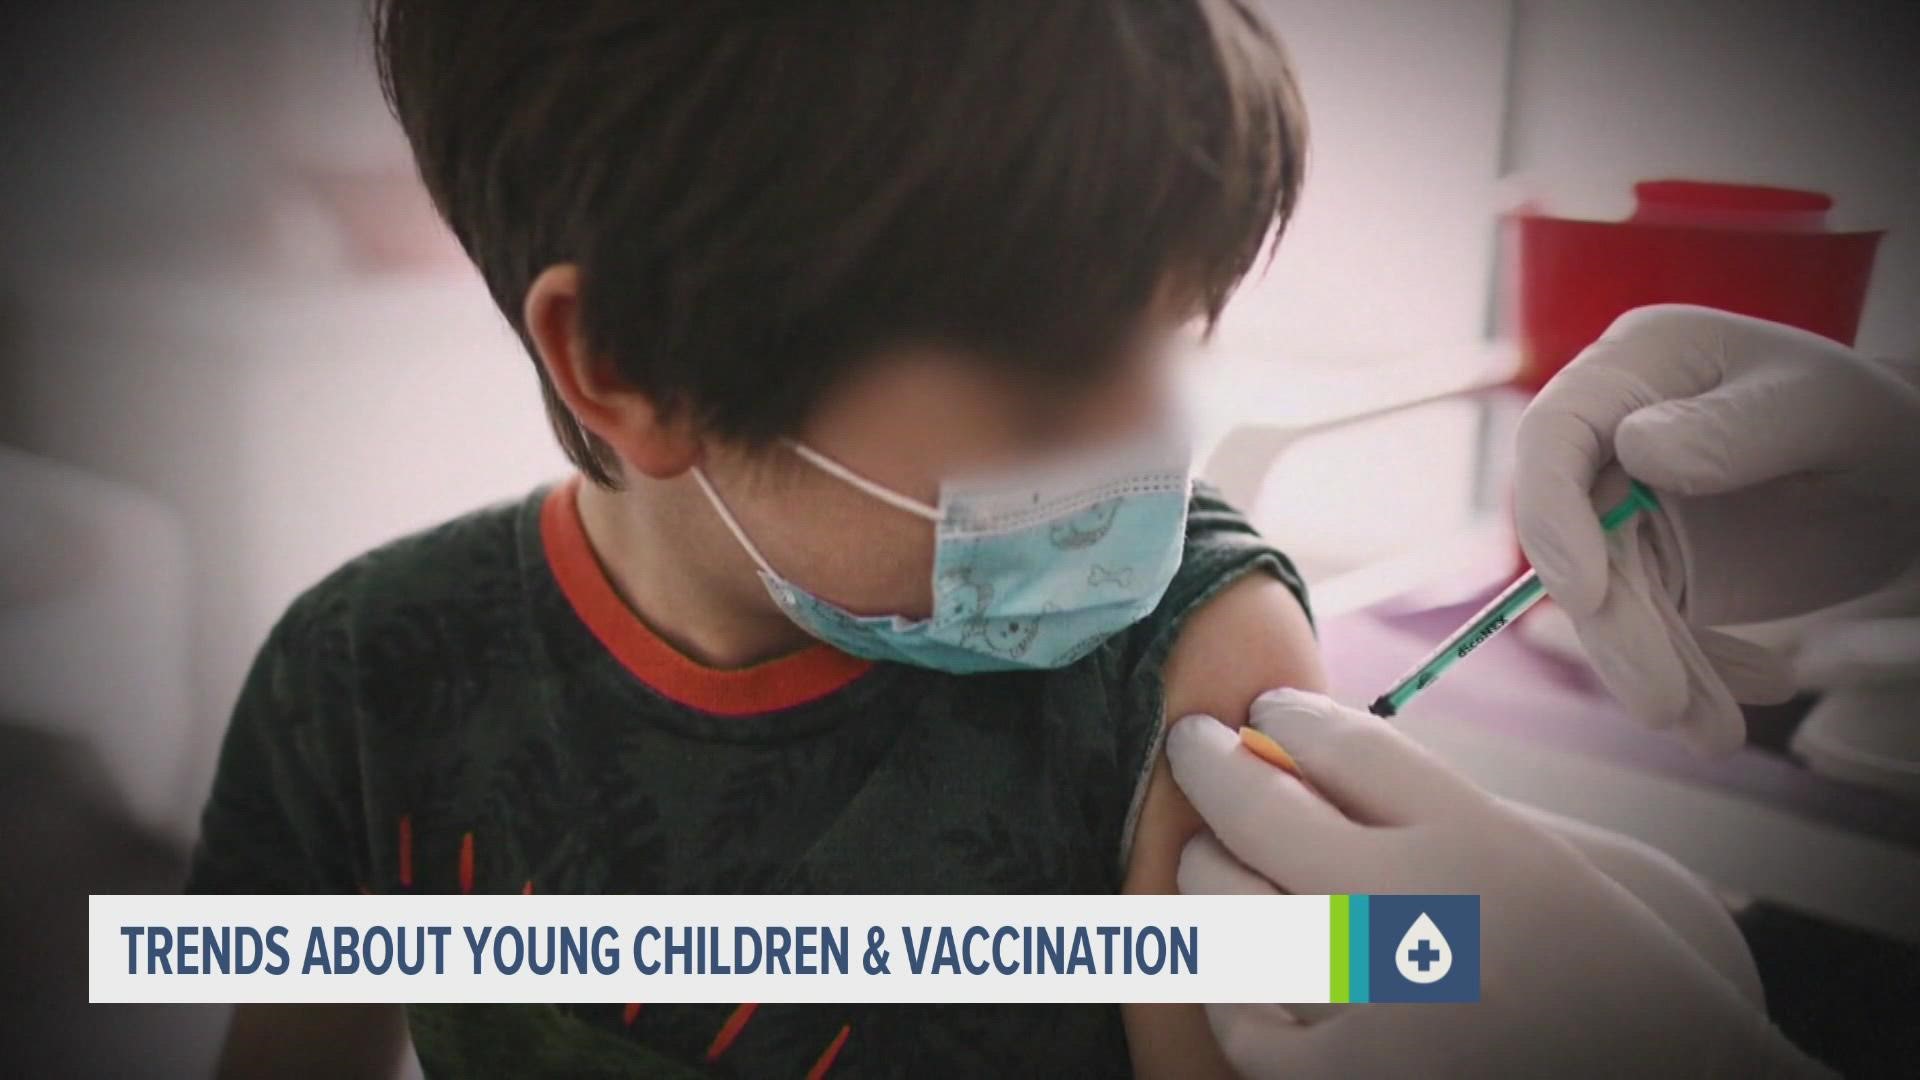 The CDC reports only 1,300 children ages 5 and under have received a COVID-19 vaccine.